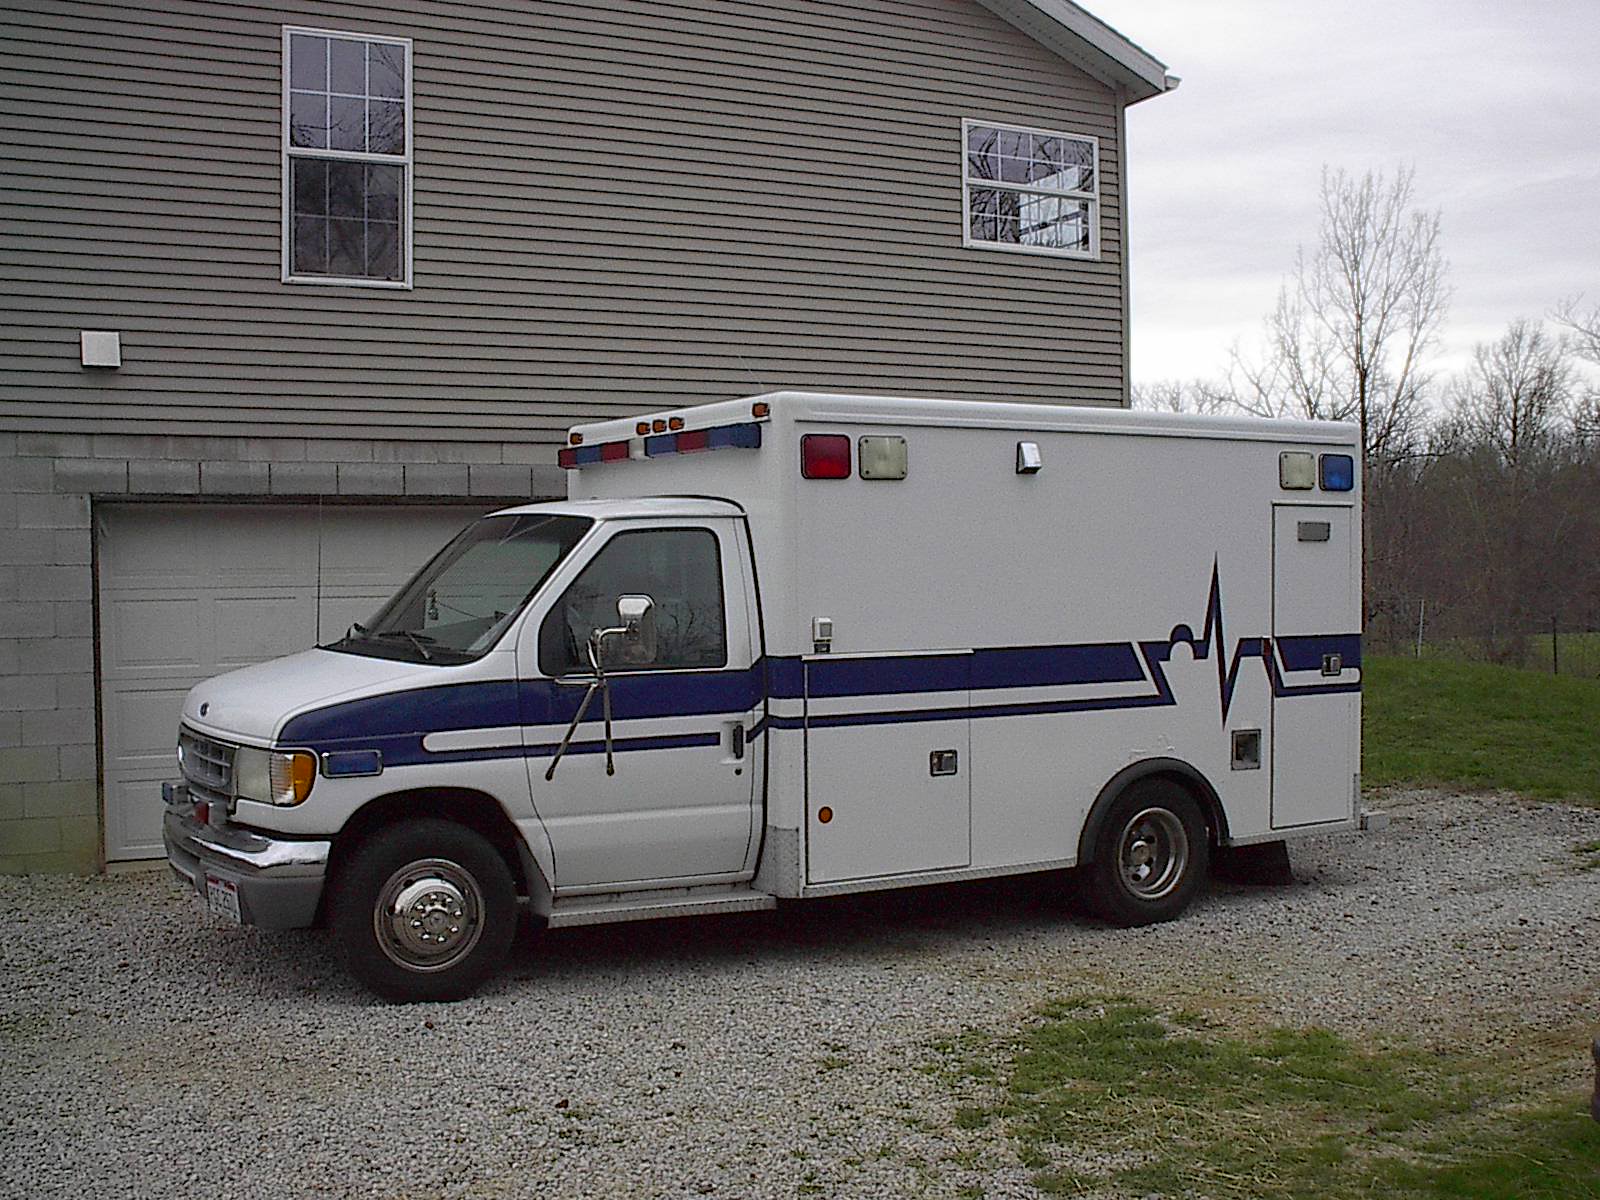 Picture of ambulance, the company truck. 24/7 Electrical Service.